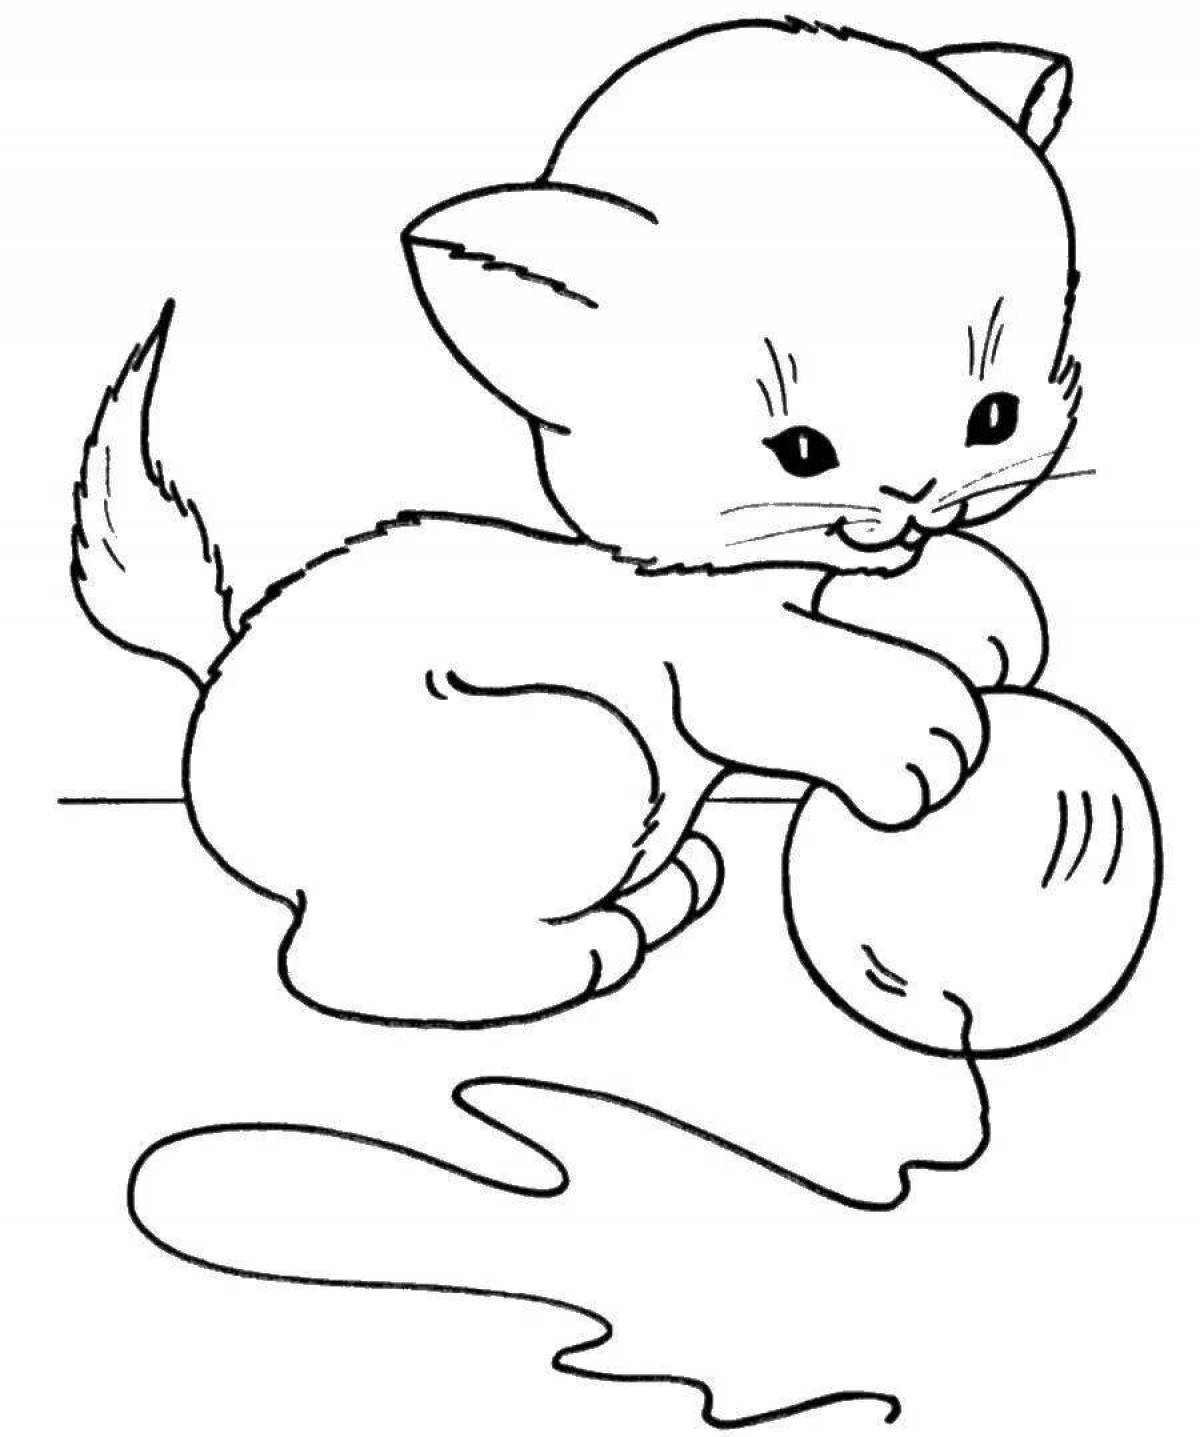 Coloring page adorable kitten